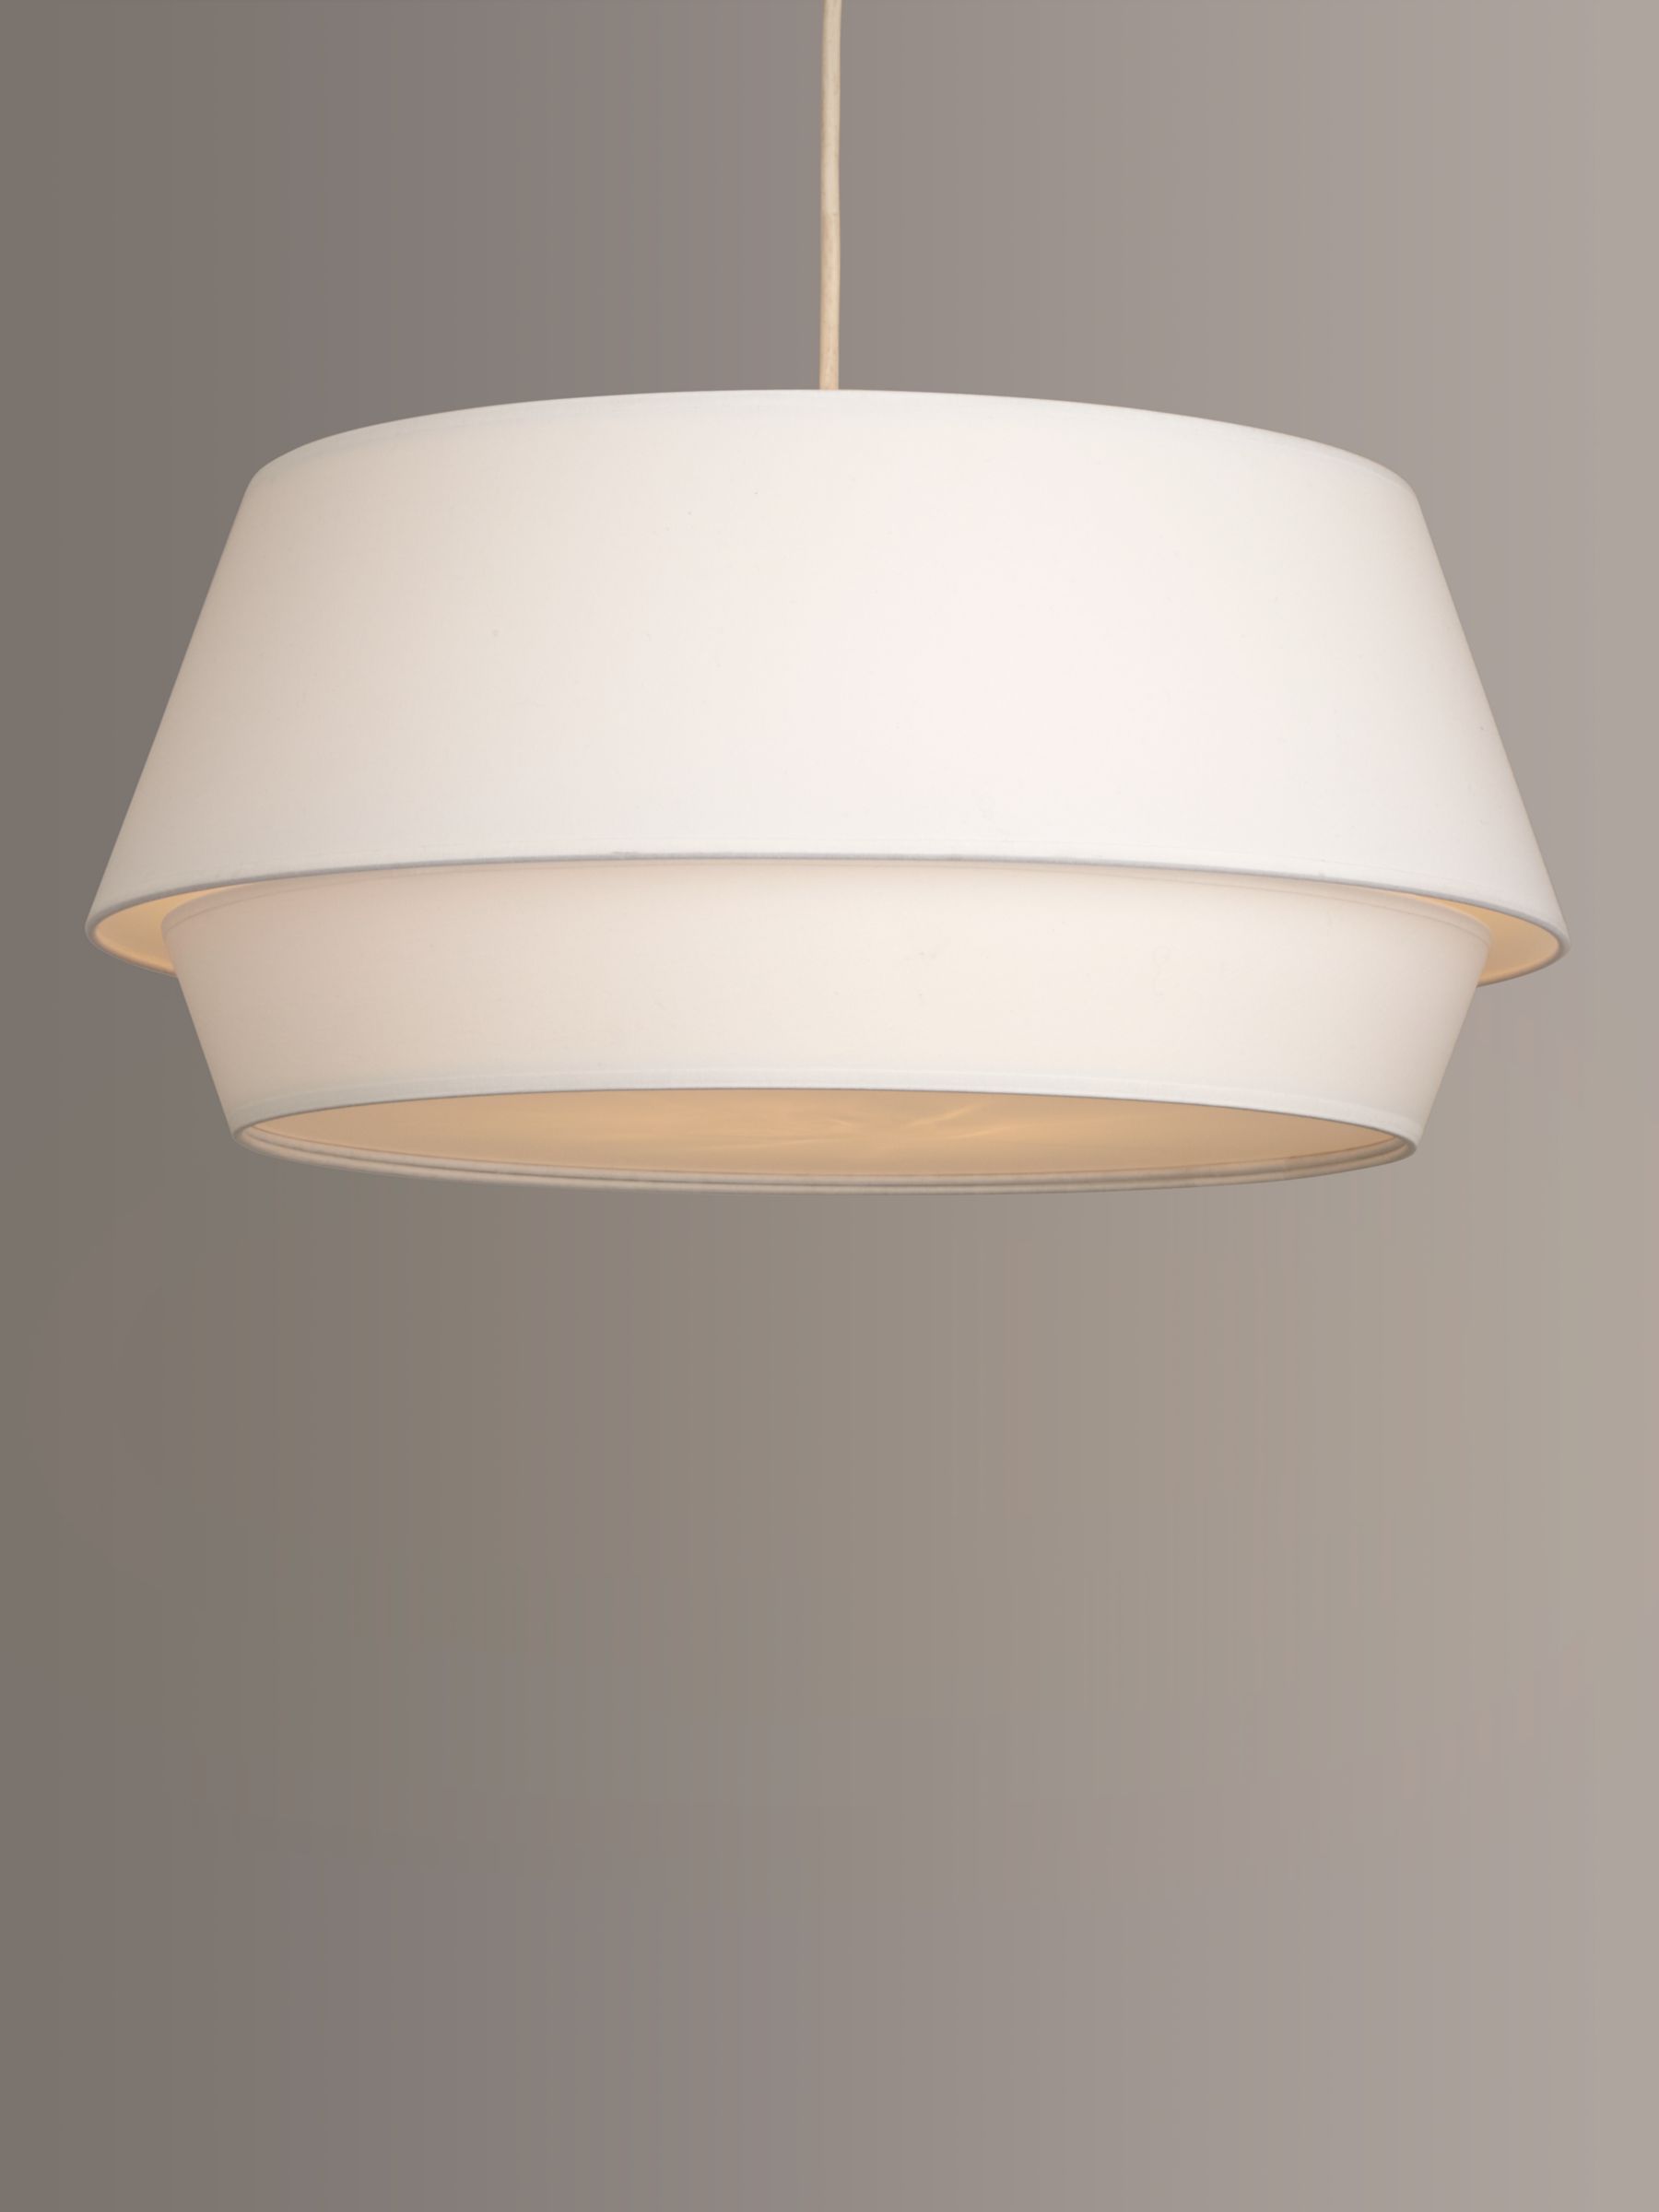 Photo of John lewis lisbeth easy-to-fit ceiling shade